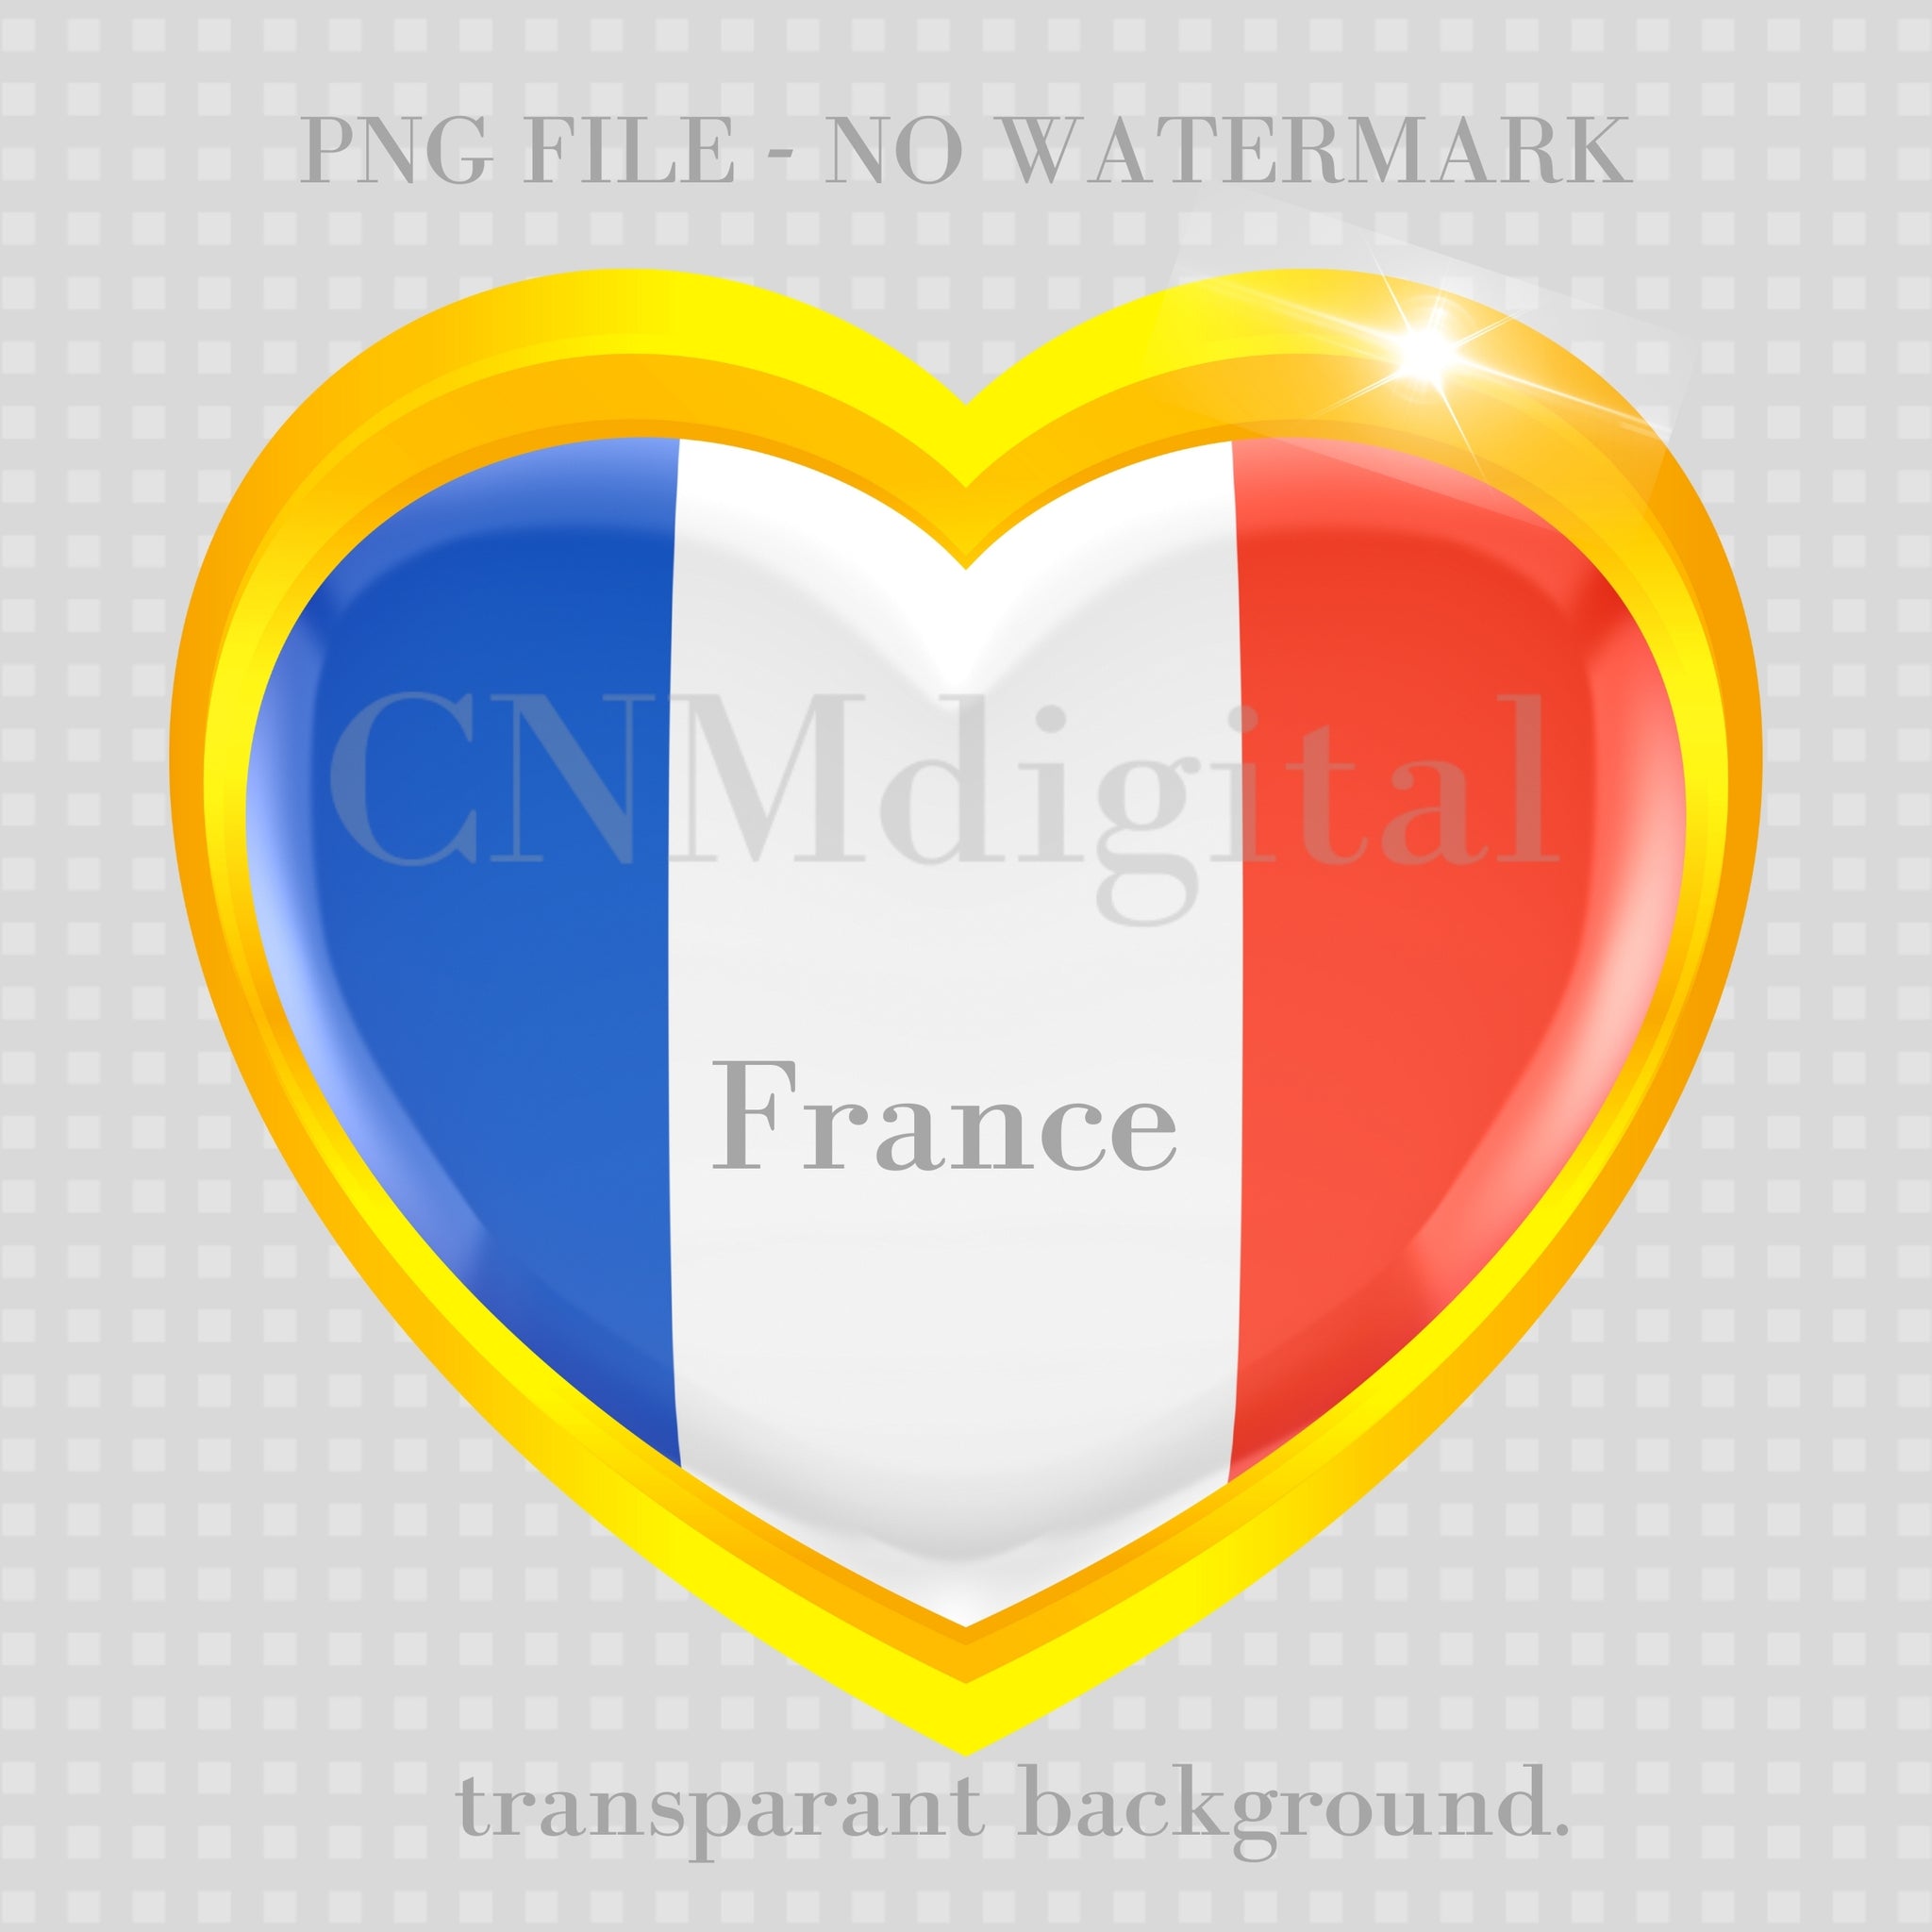 France flag country, Instant Download, digital file flags, Heart shaped, France Nation flag, France European country, World Clip Art, national flags, Flags collection High Quality Transparent PNG file ready to print.